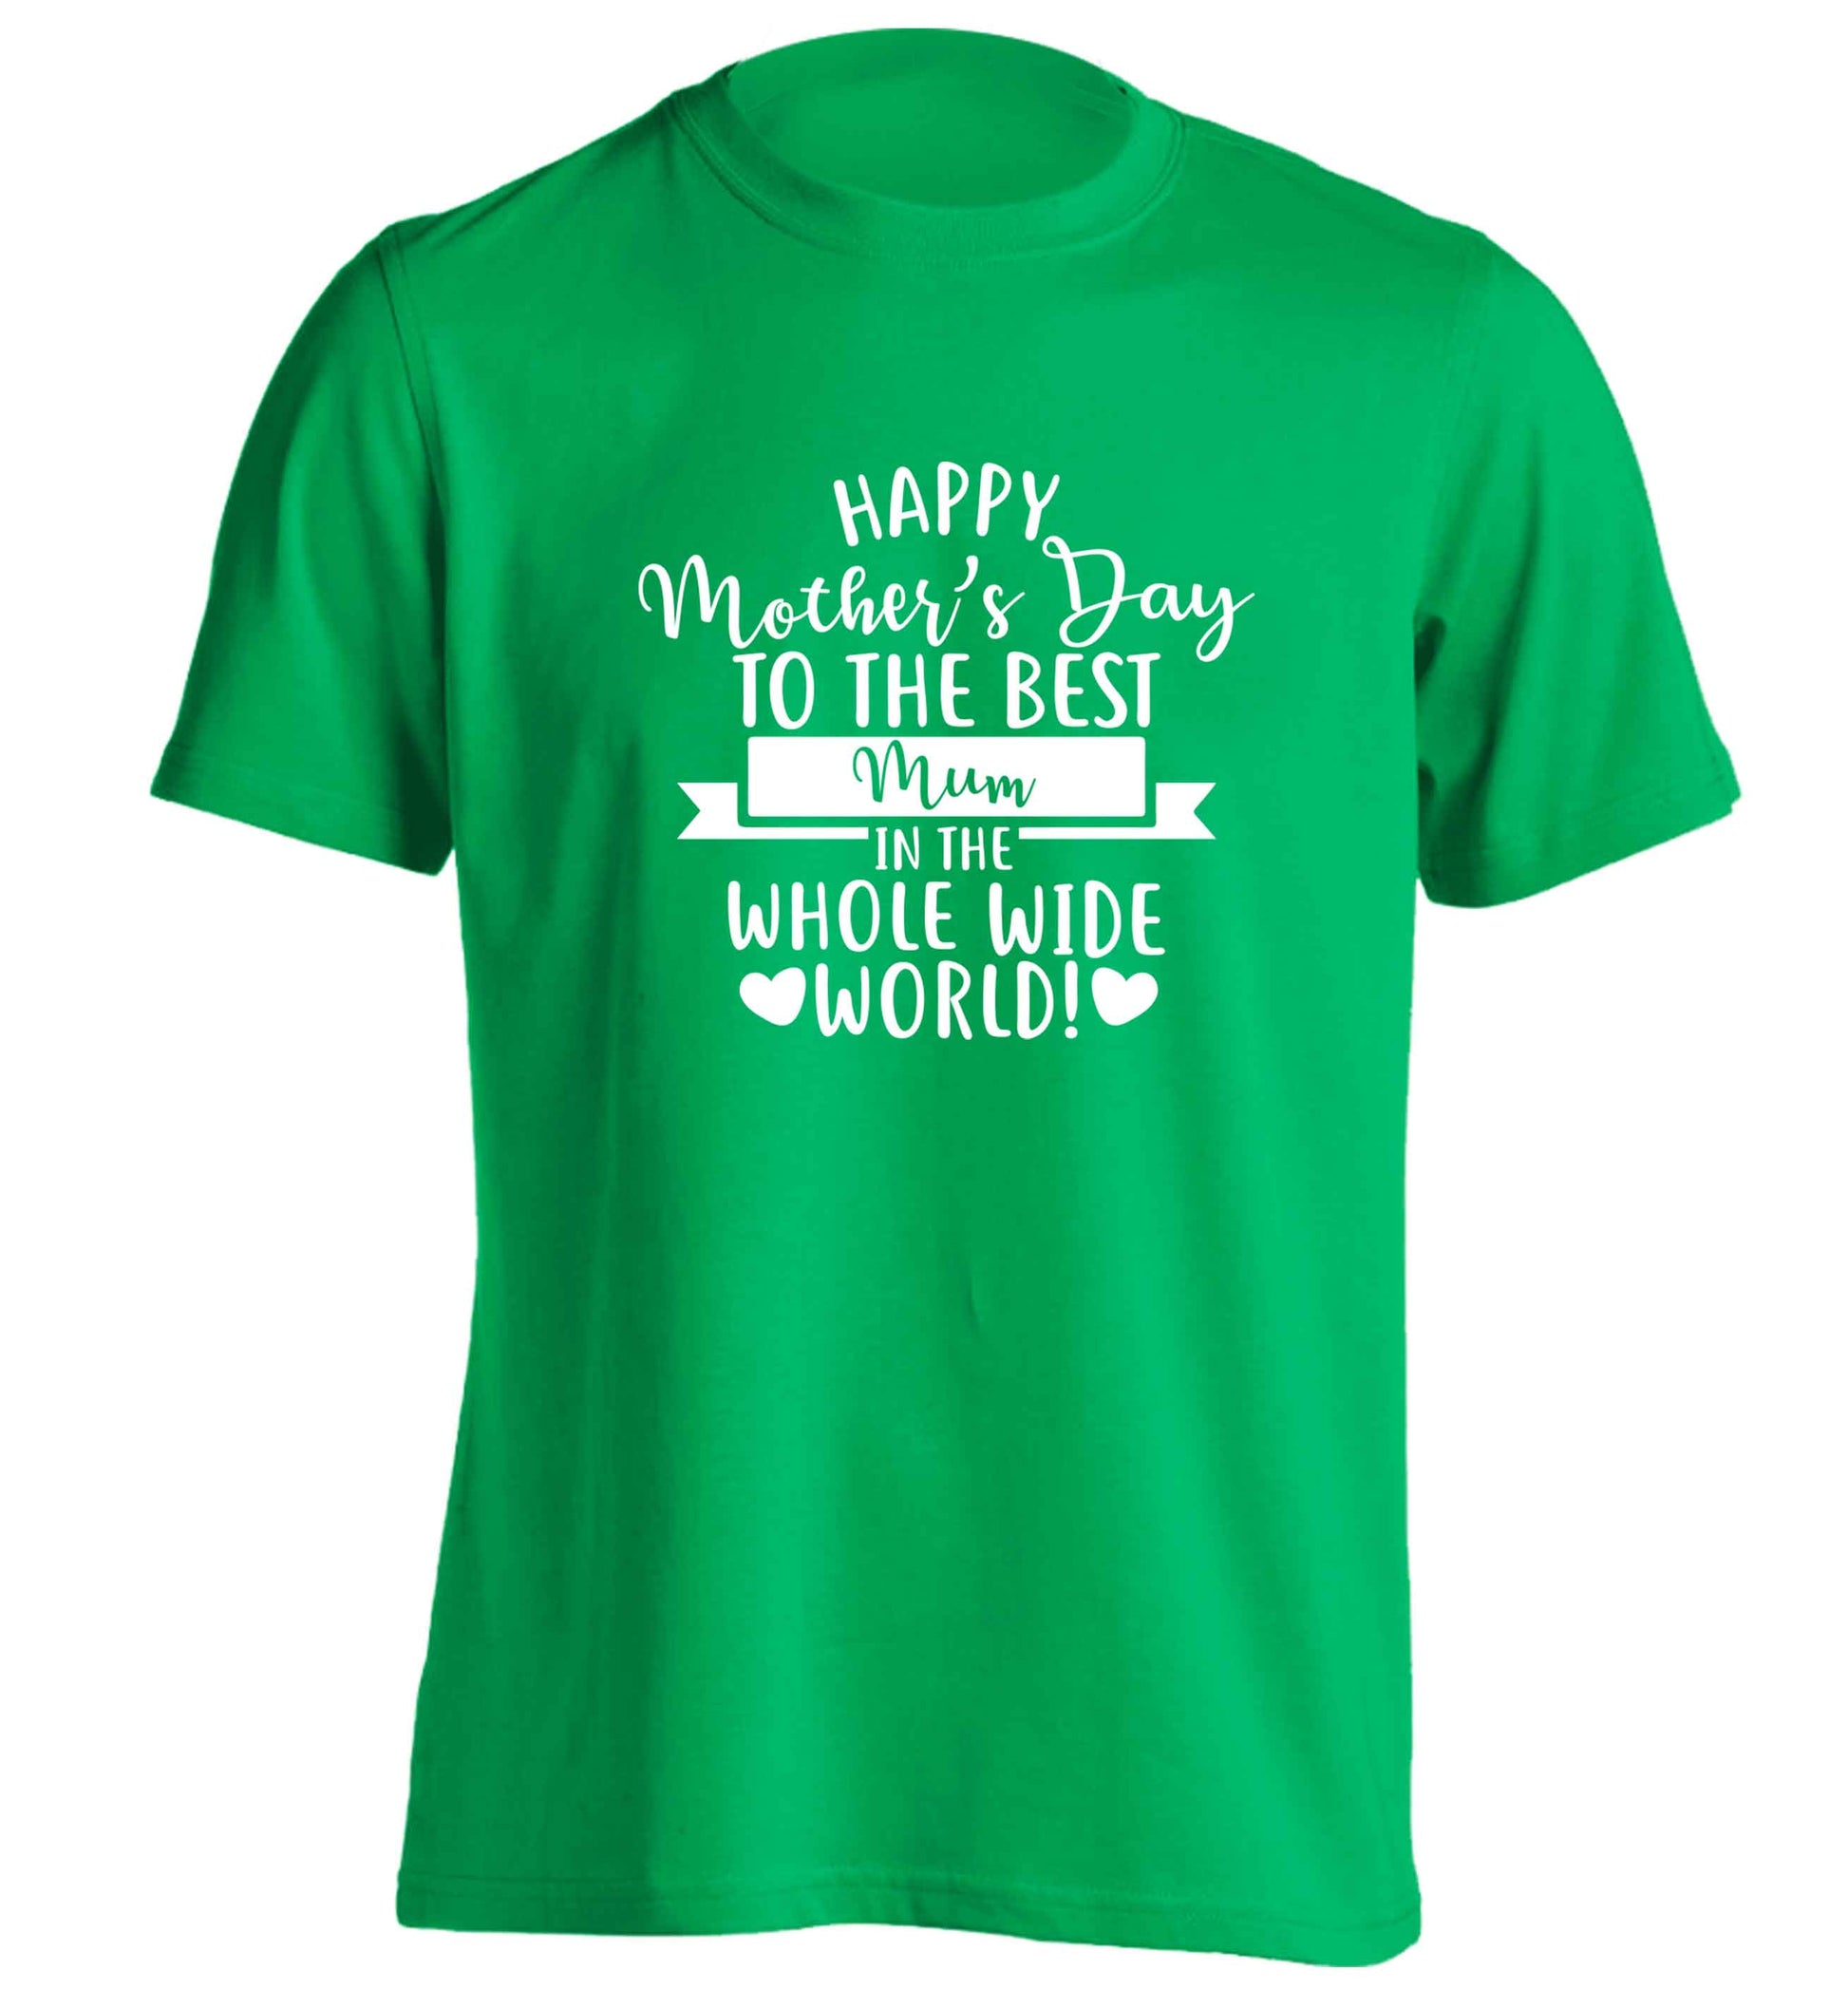 Happy mother's day to the best mum in the world adults unisex green Tshirt 2XL